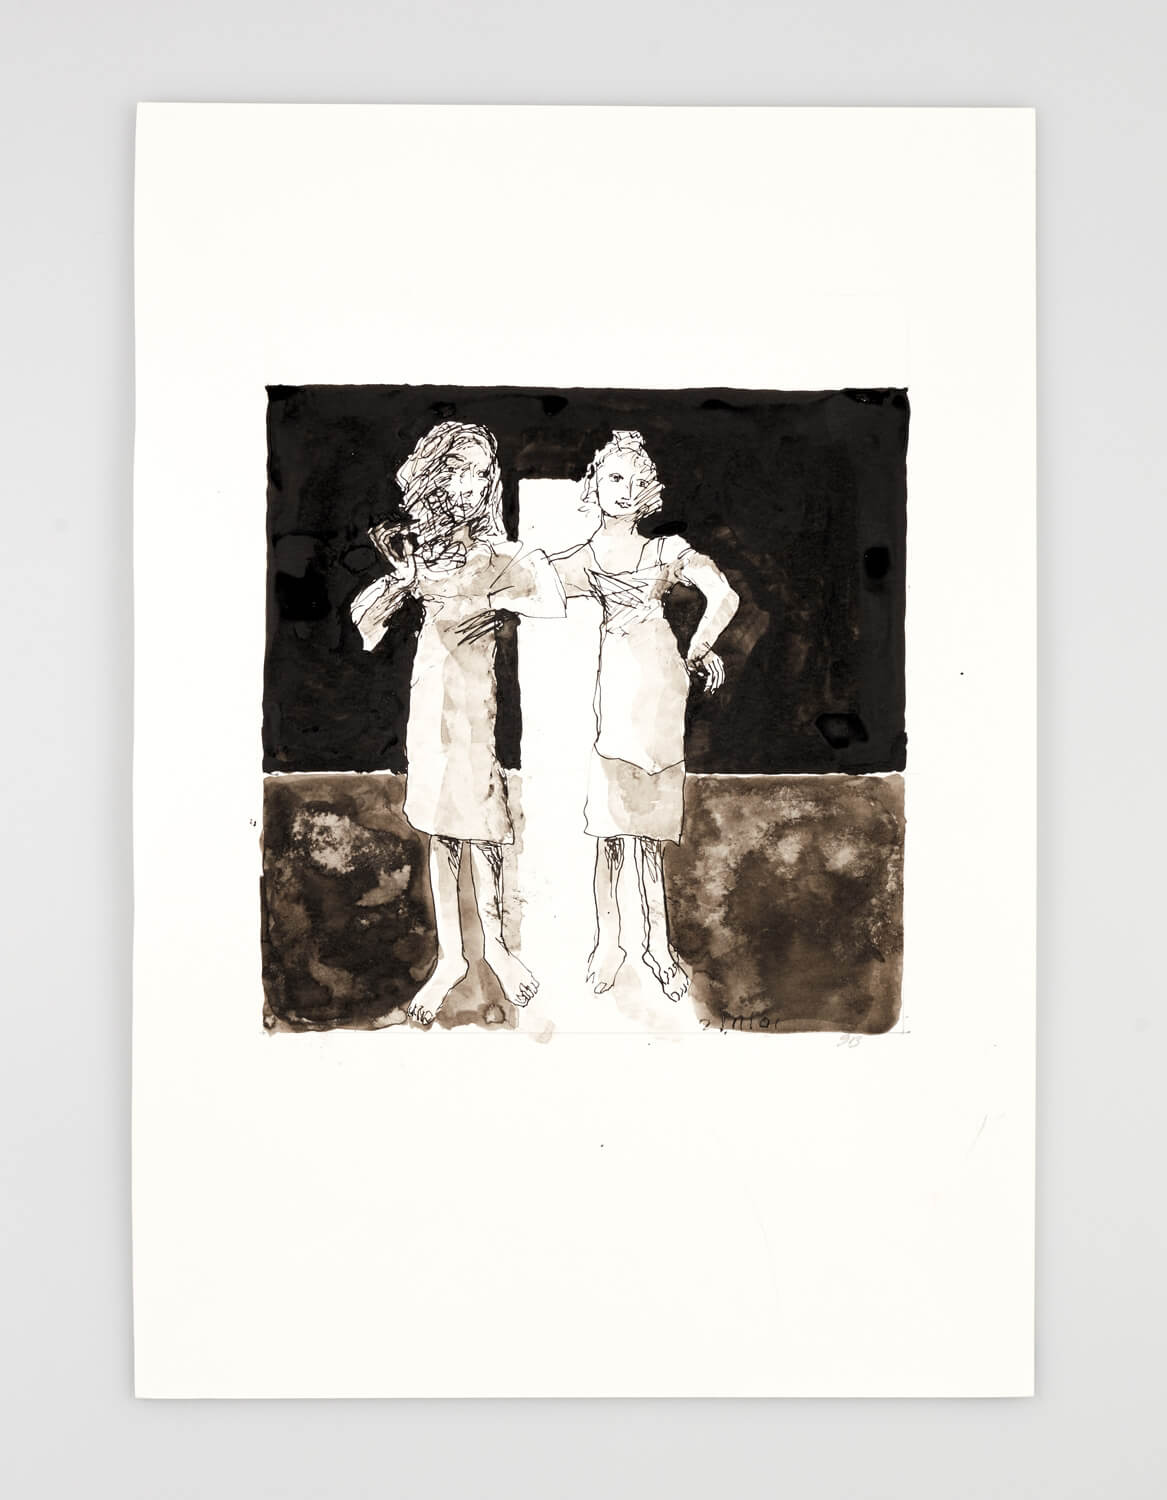 JB020 - Two Women - Being dressed - 2001 - 50 x 35 cm - Indian ink and wash on paper